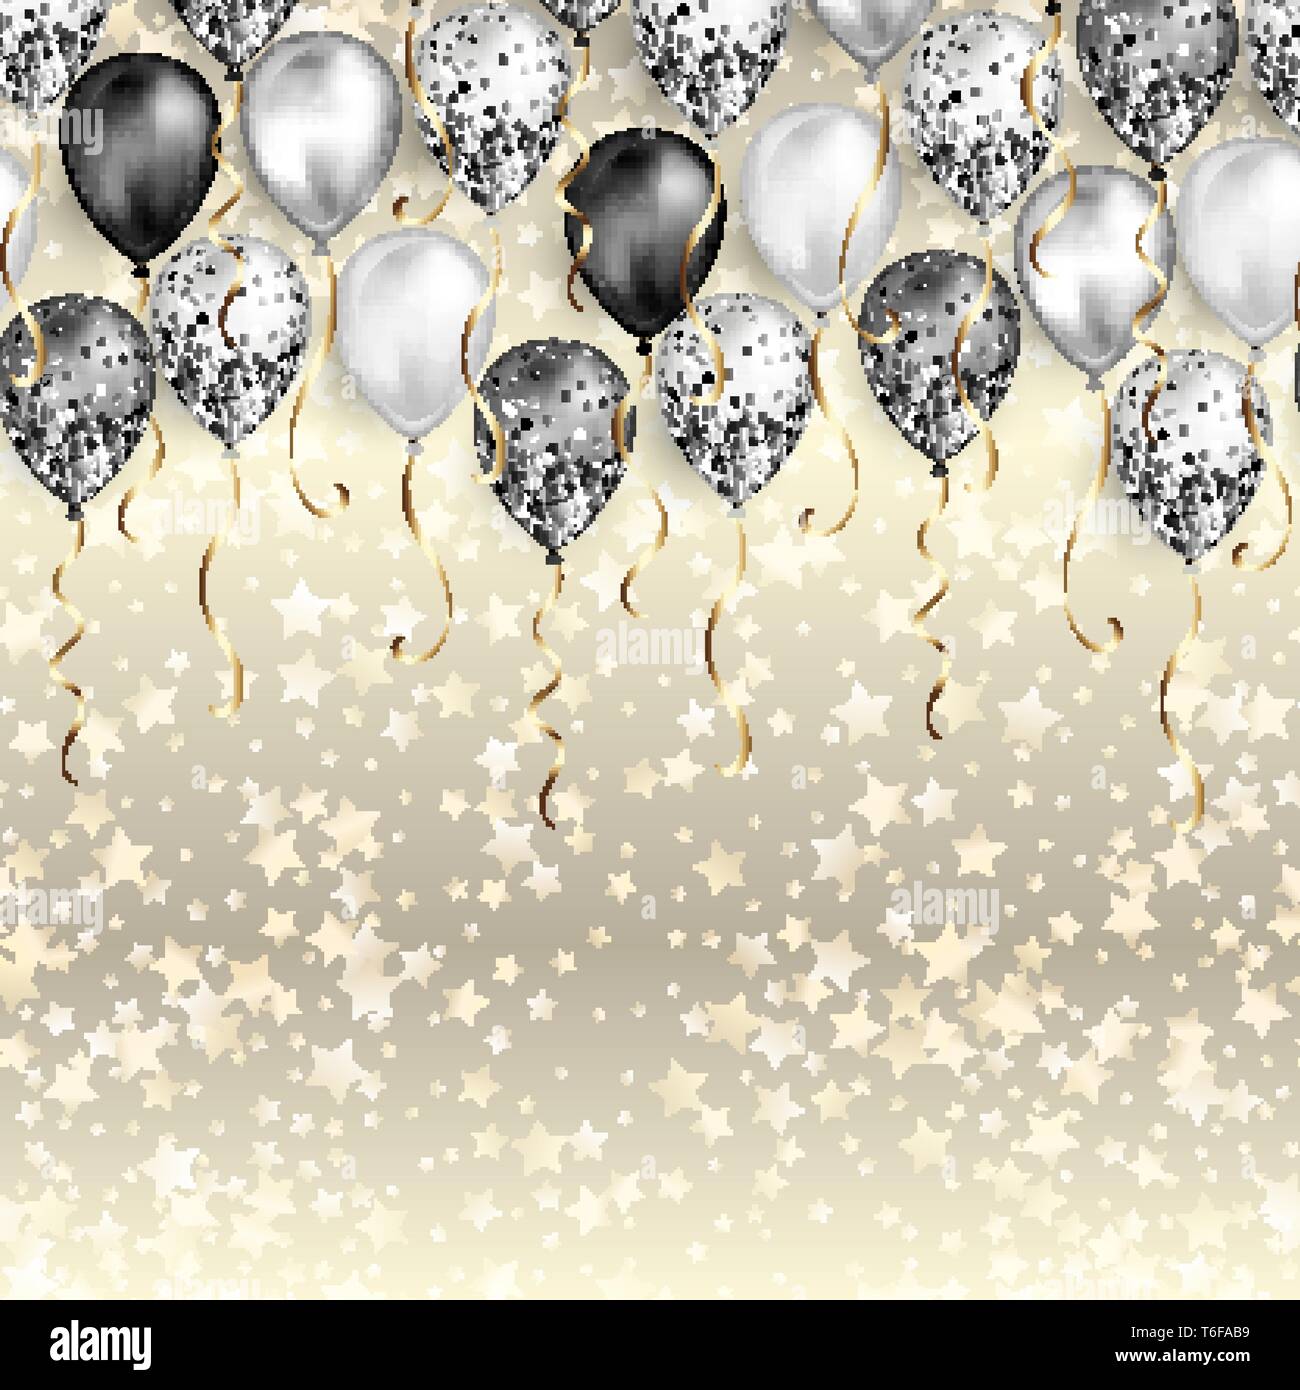 Super Background with stars confetti and black and white balloons as top VL-71